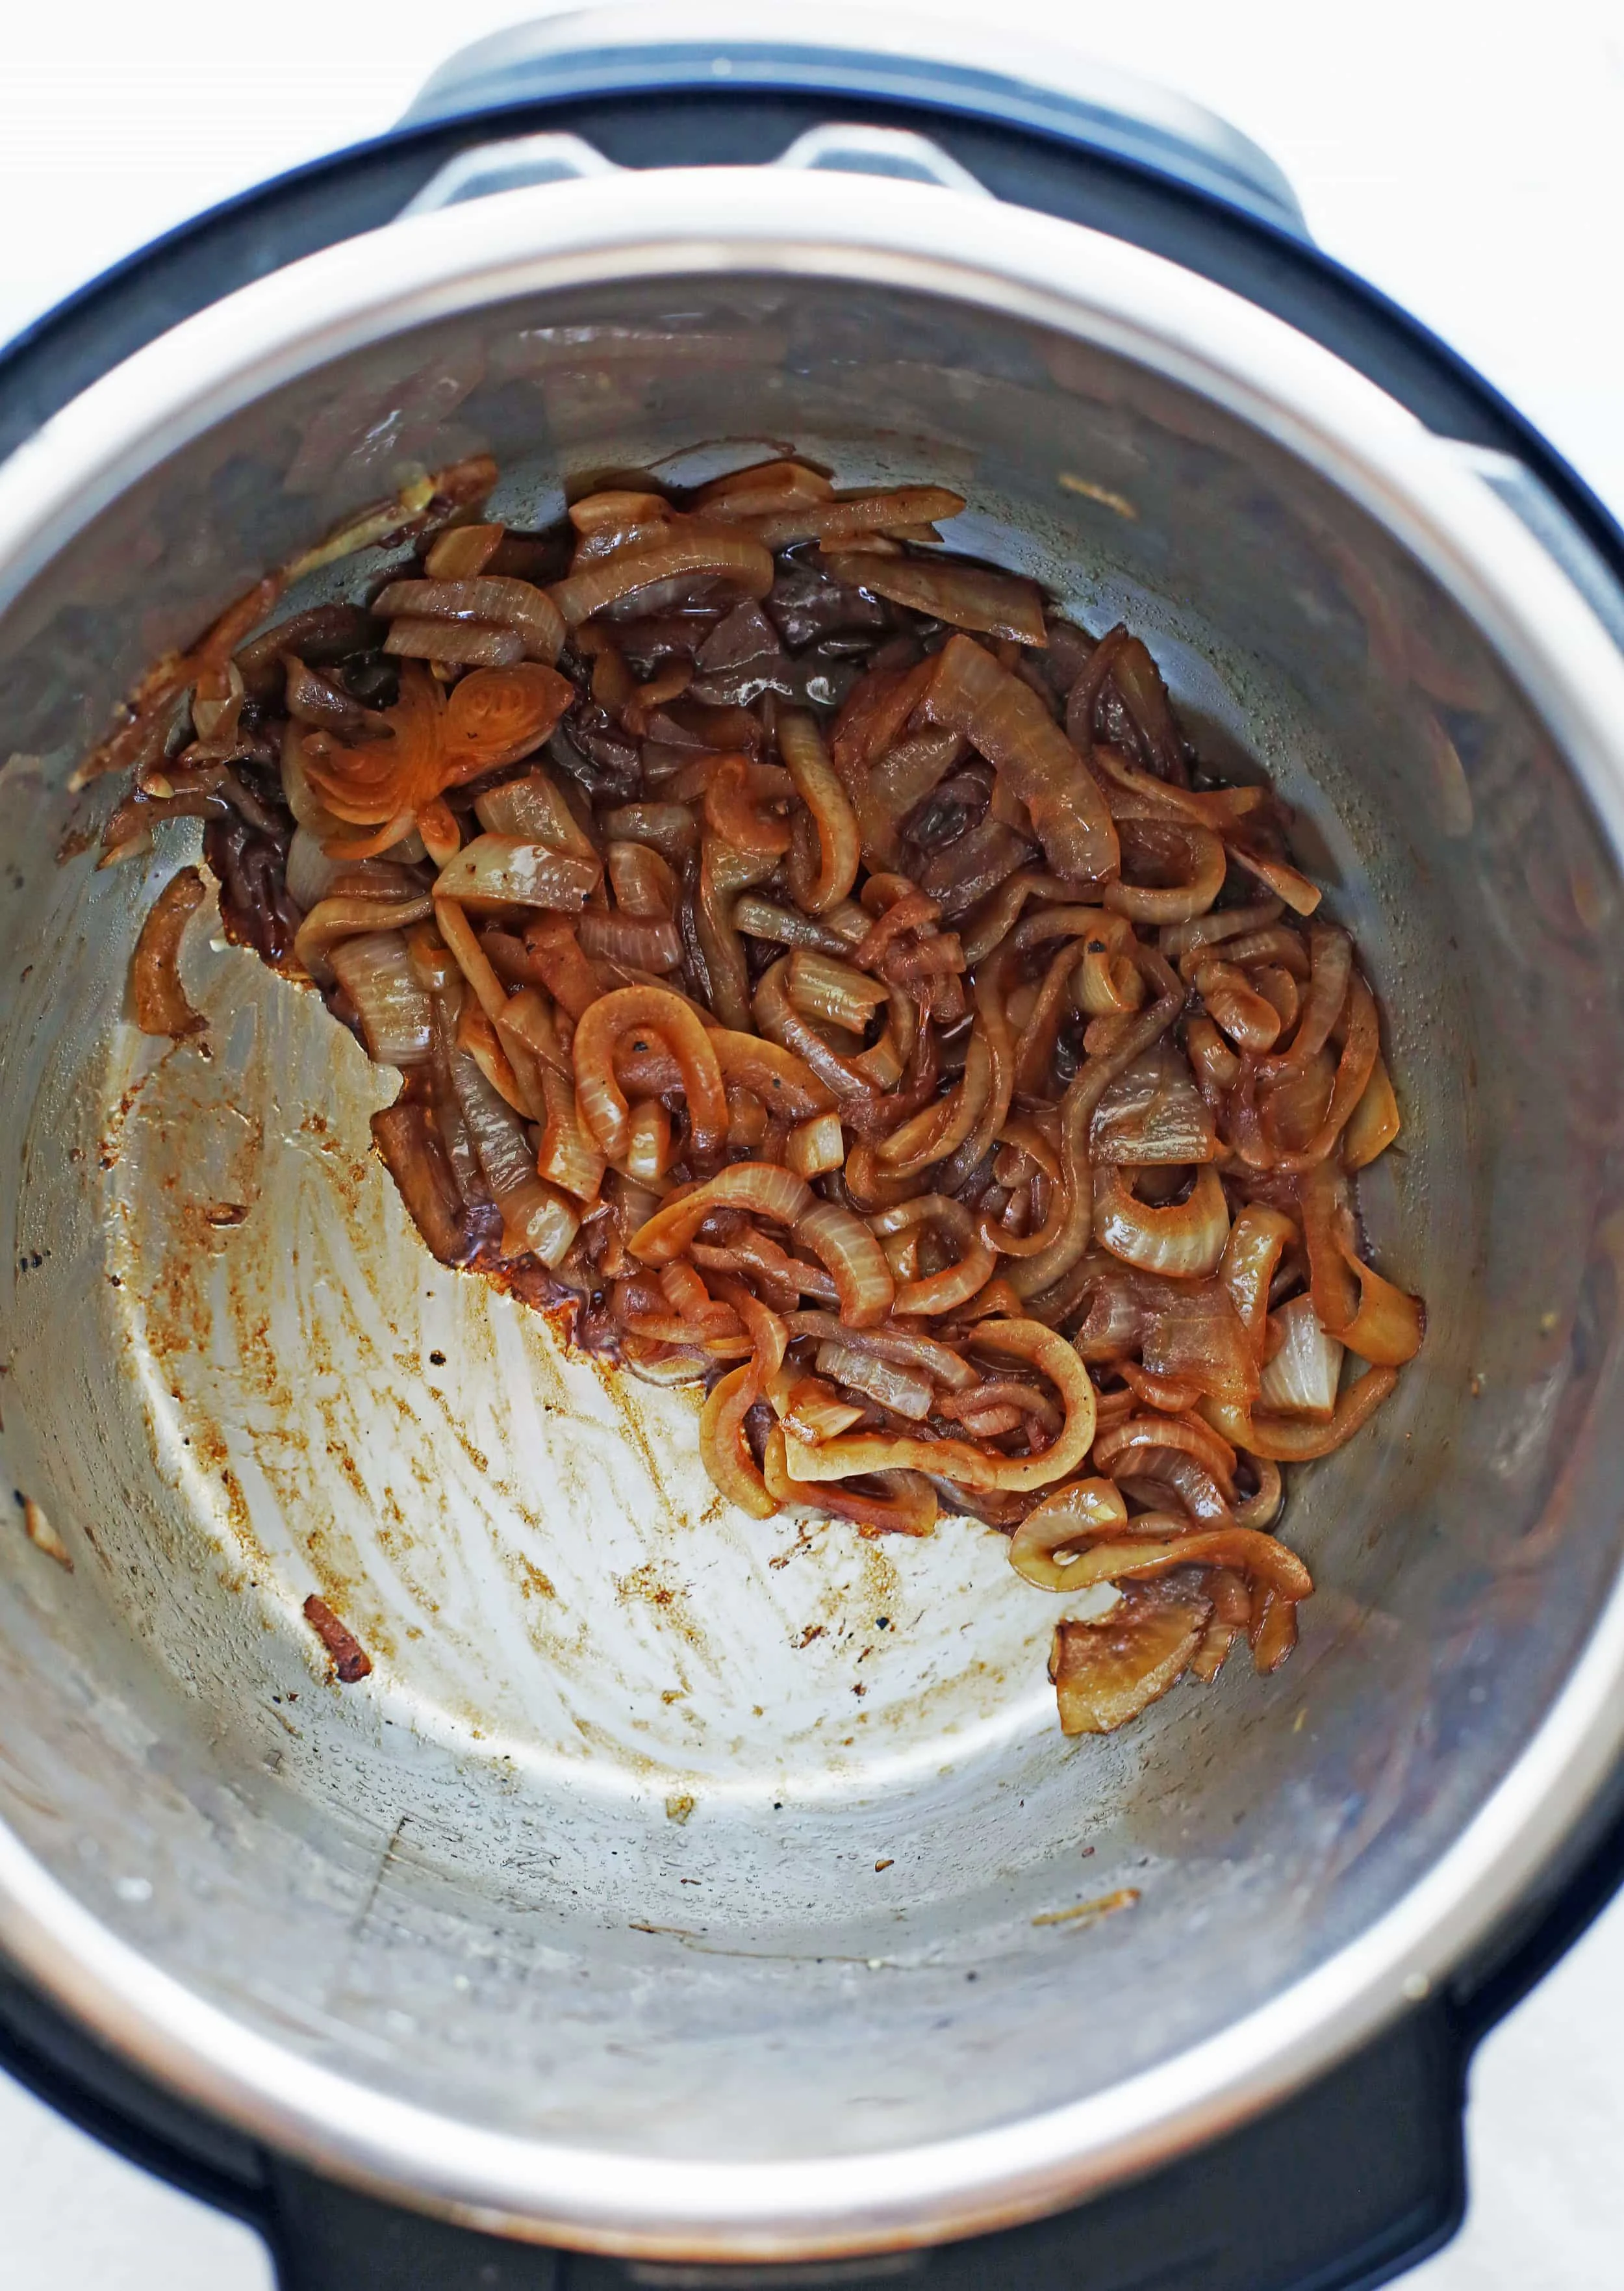 Caramelized balsamic sliced onions in the Instant Pot.